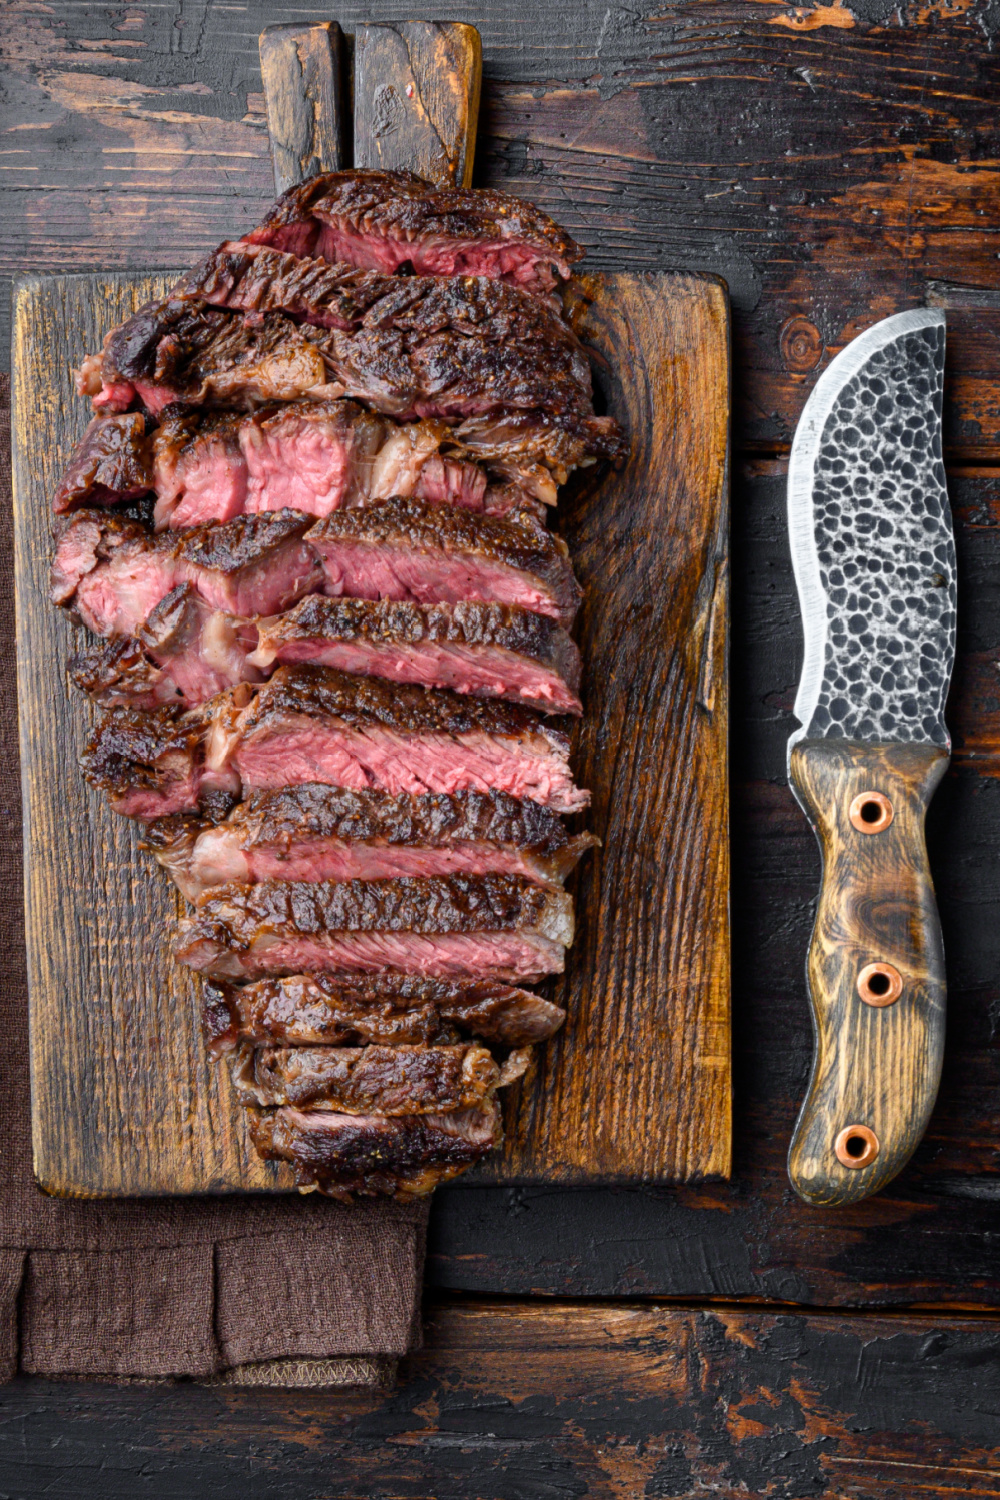 A cooked steak sliced on a cutting board with knife.